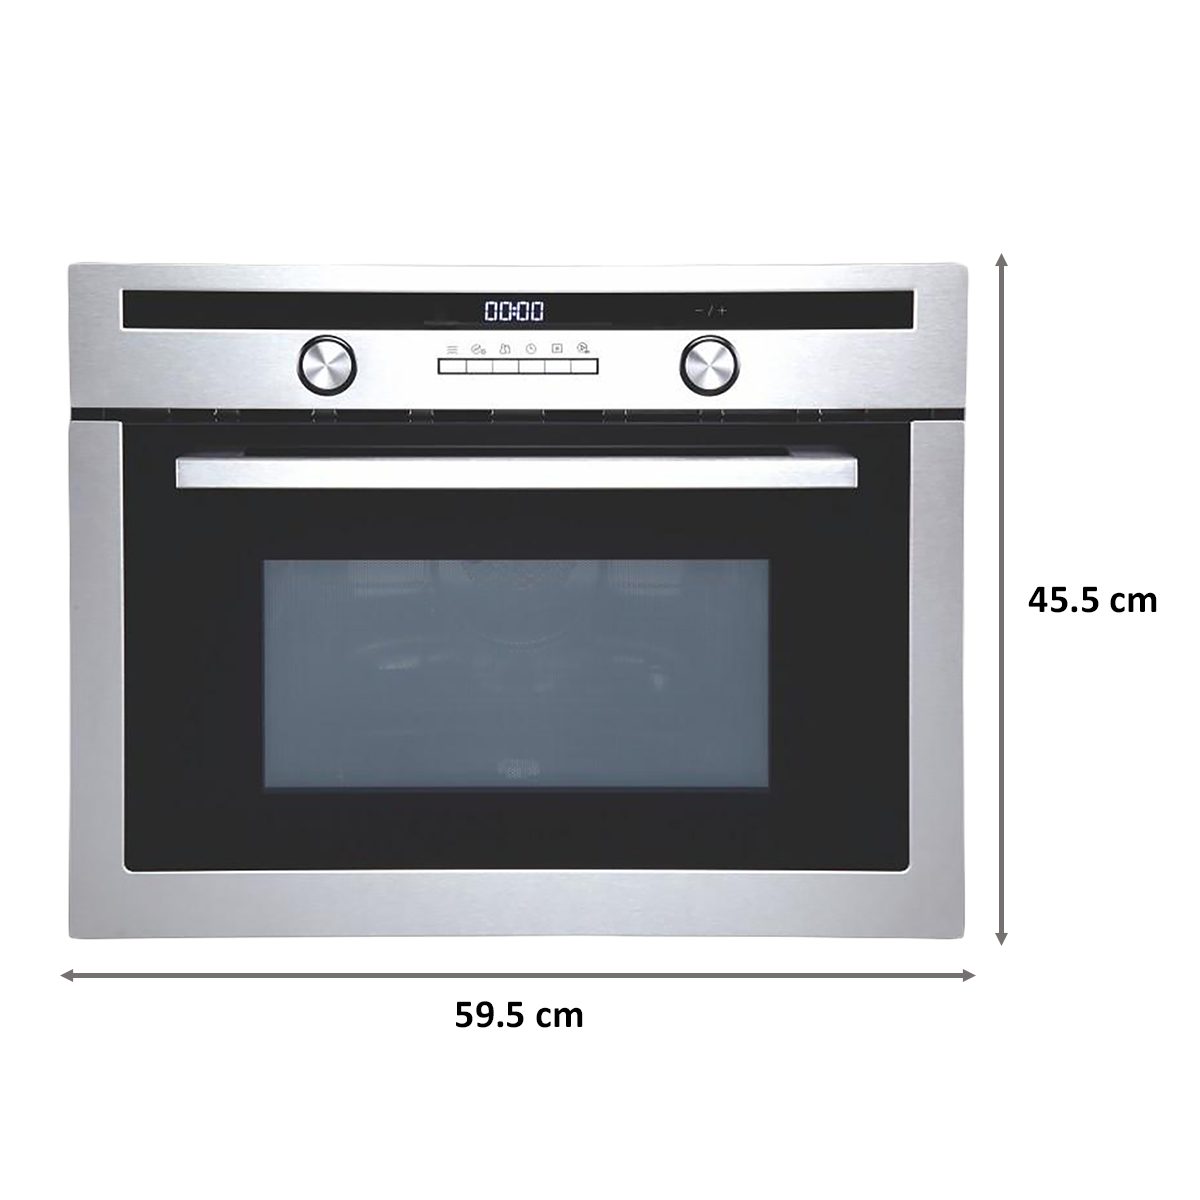 Elica 44 Litres Built-in Oven (LED Display, EPBICMBOOVNTRM 44L, Steel)_2